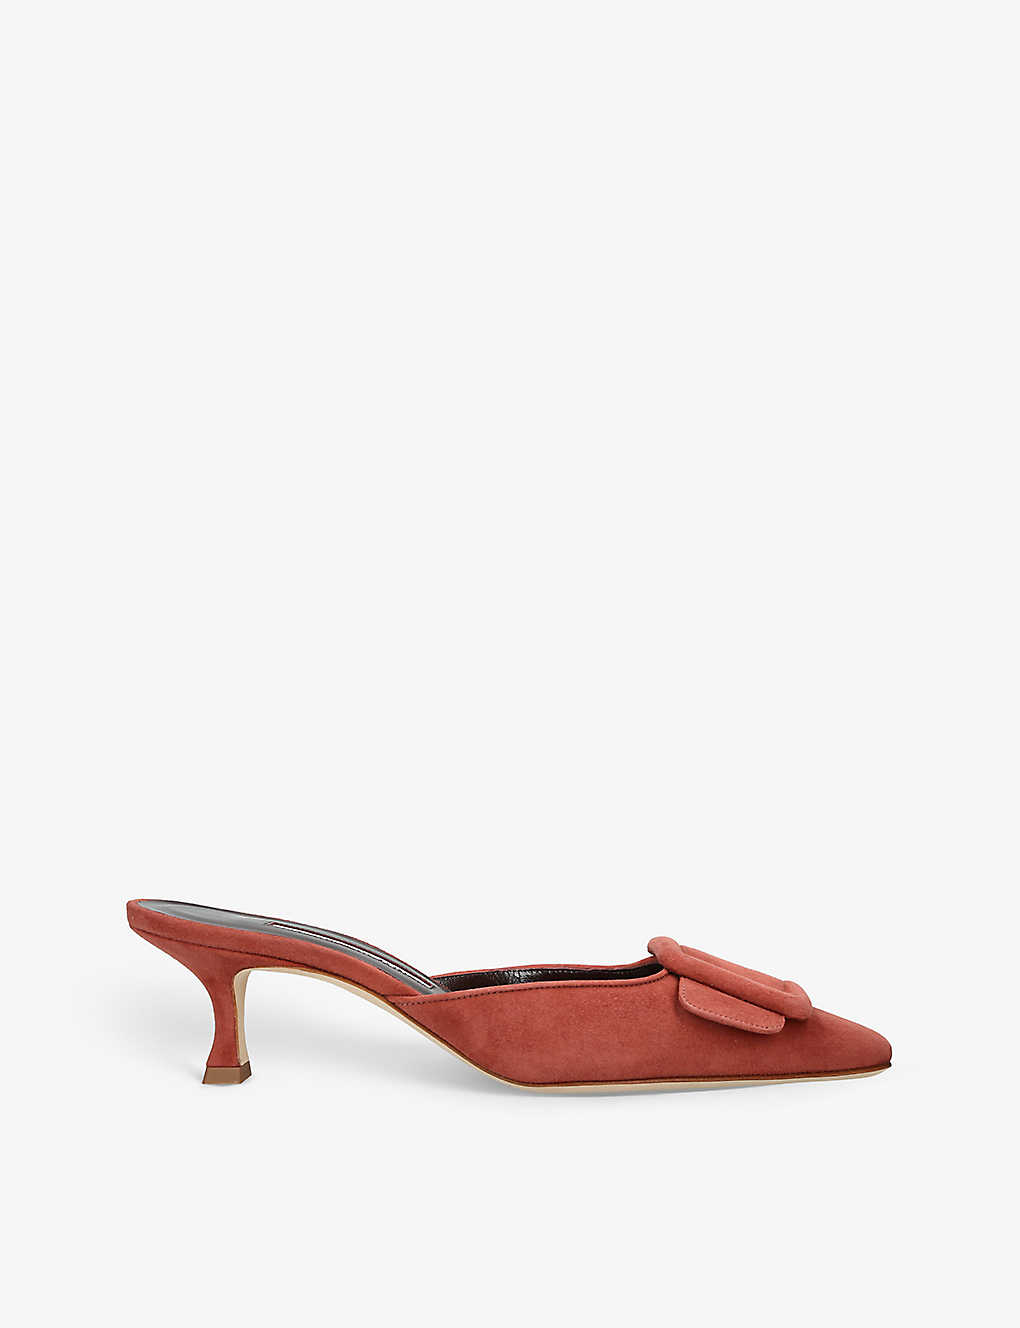 Manolo Blahnik Maysale Buckled Suede Heeled Mules In Red/other